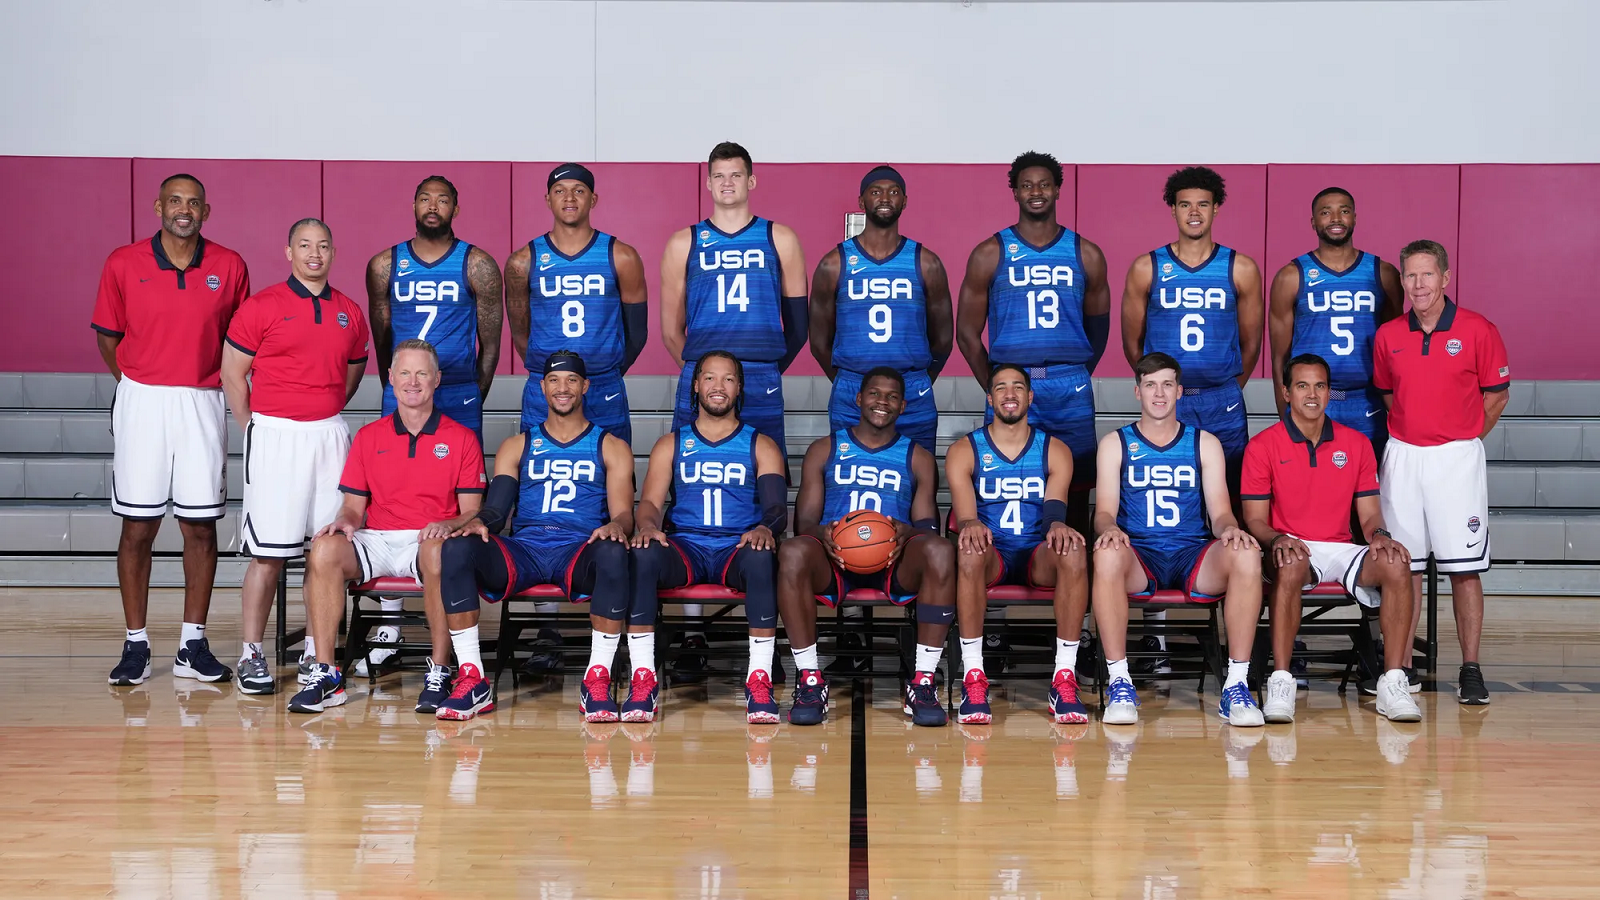 Historic Moment For Abu Dhabi As Men’s USAB Team Complete First Practice In Region